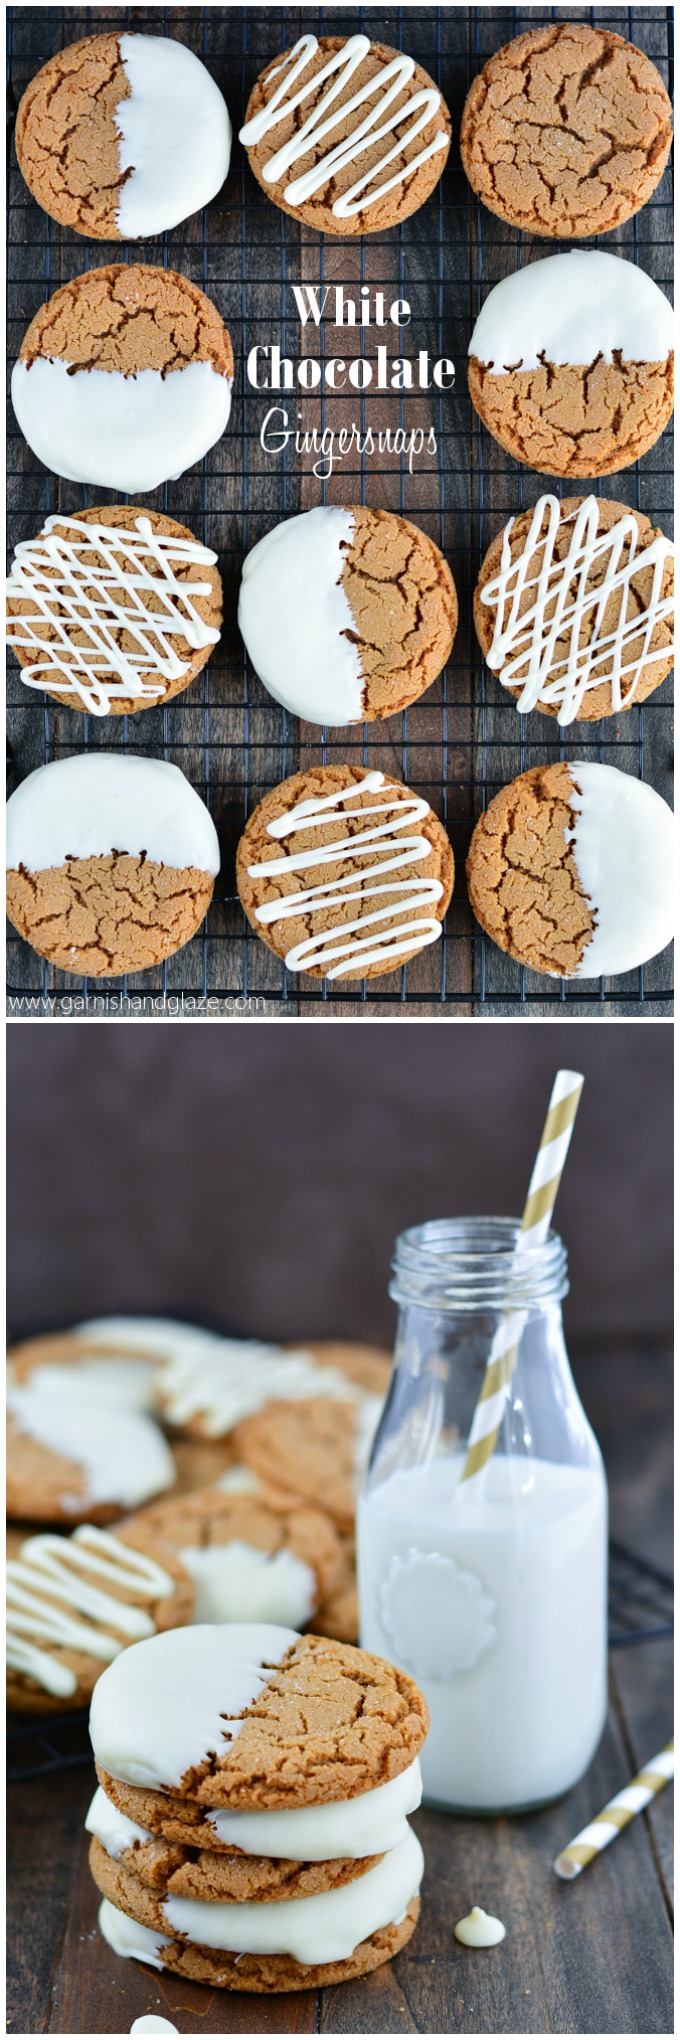 Spread the holiday joy with these soft White Chocolate Dipped Gingersnaps!